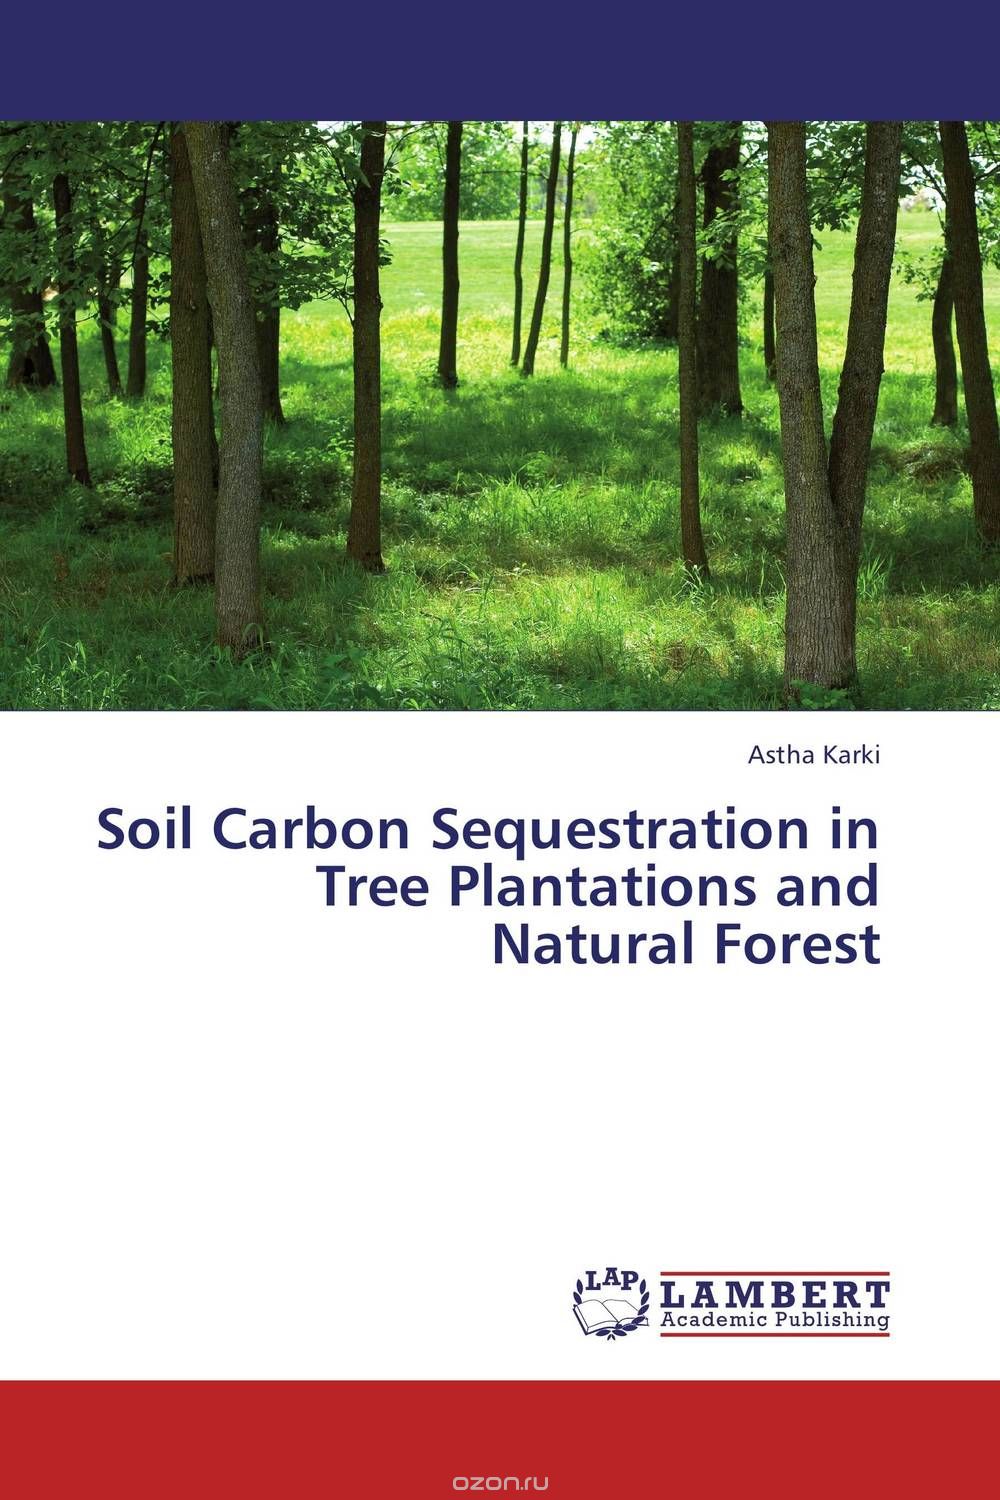 Soil Carbon Sequestration in Tree Plantations and Natural Forest